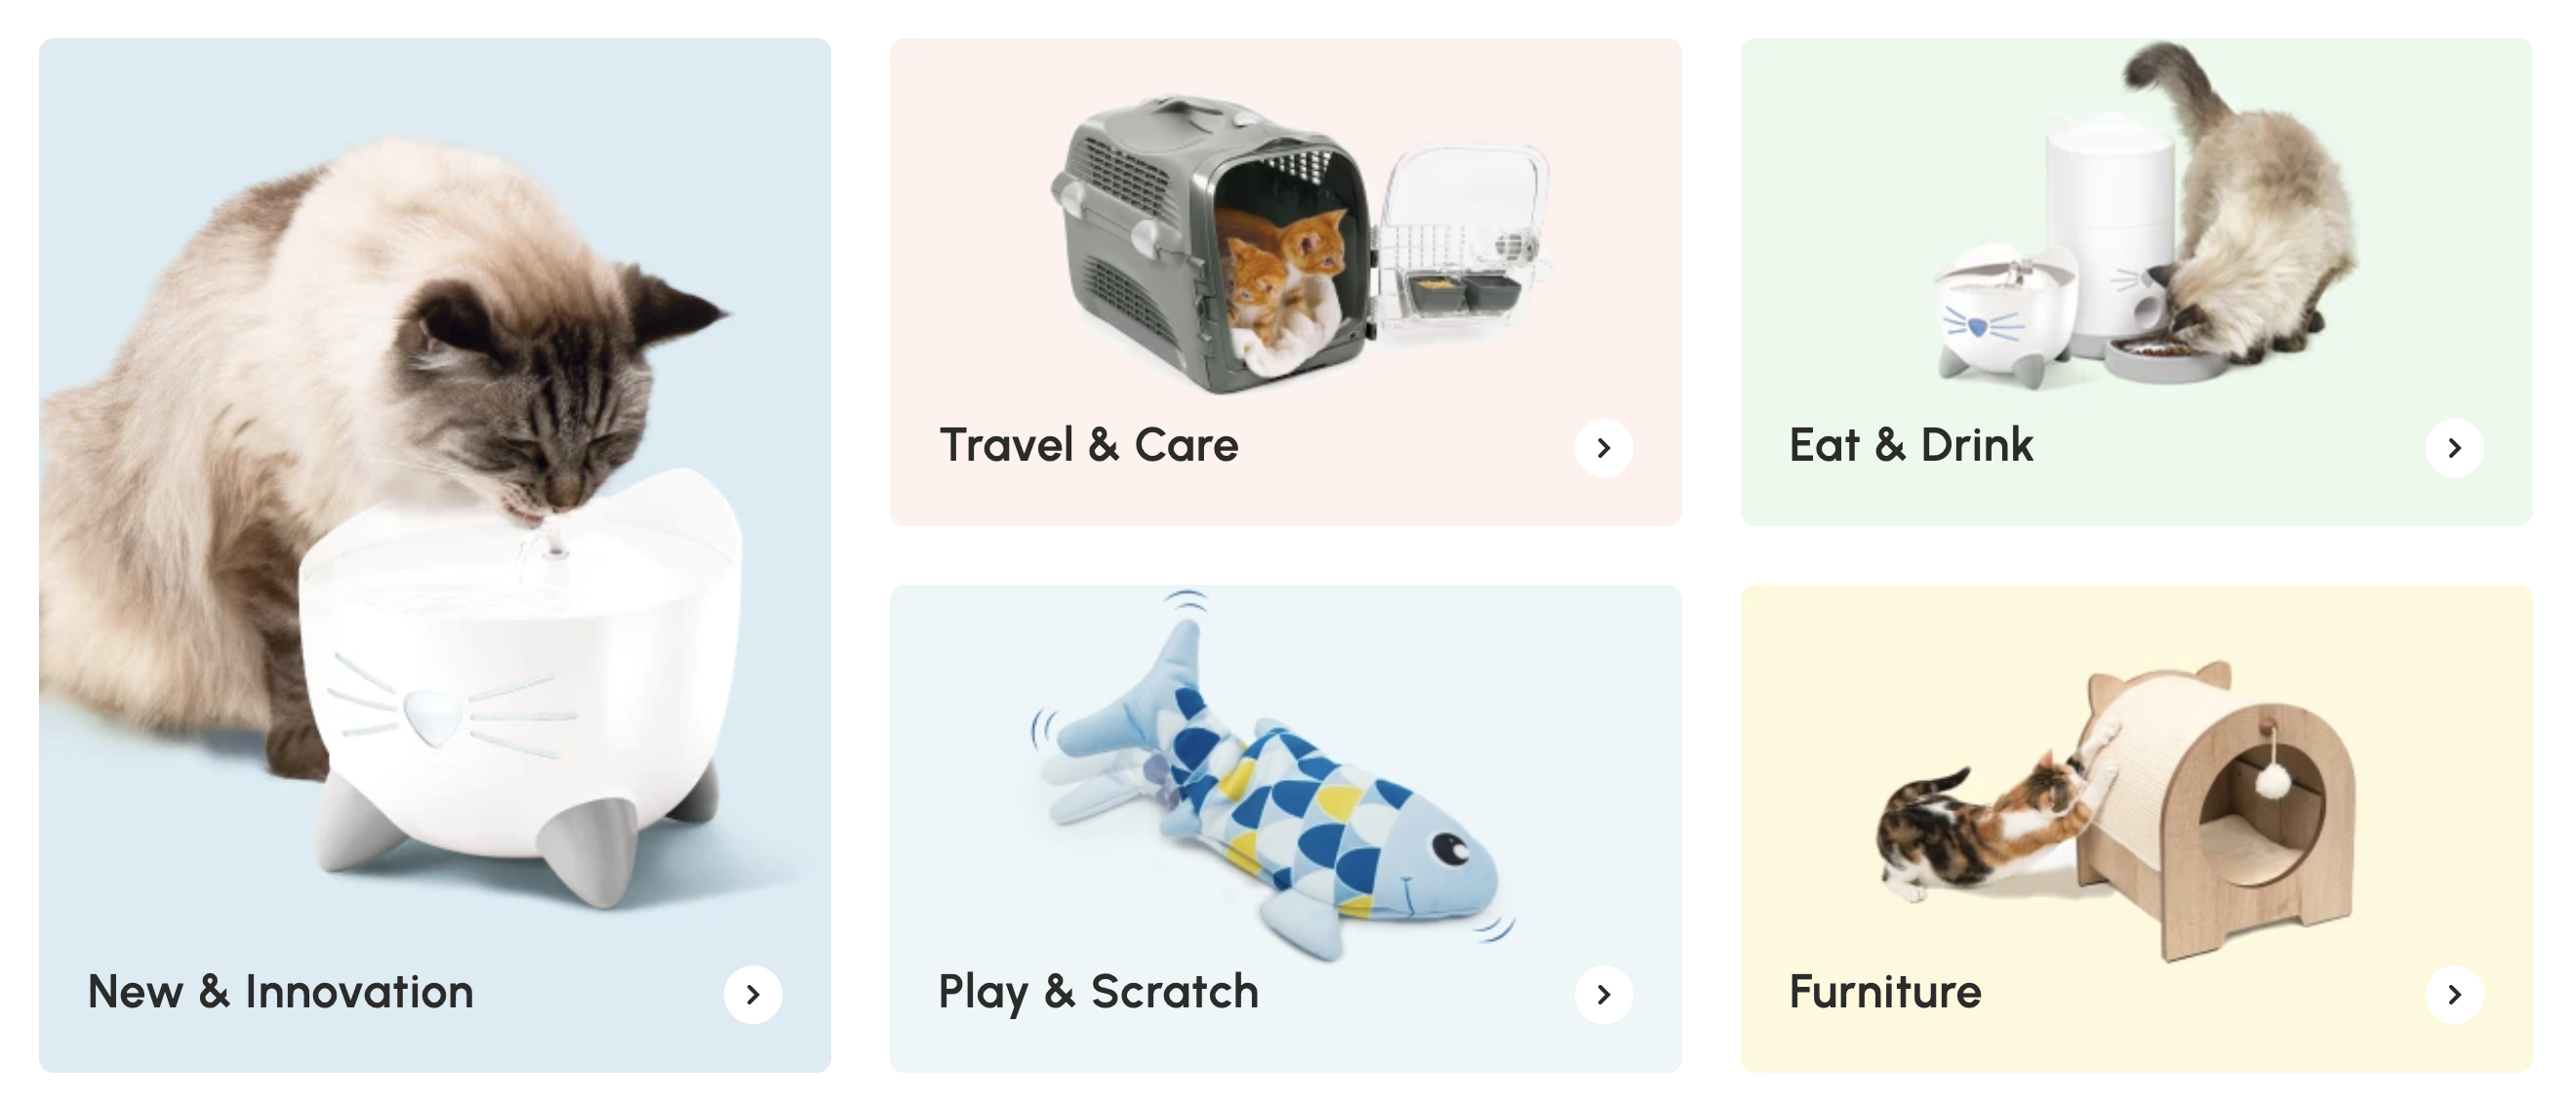 A screenshot from Cait's US Shopify Plus store showing an examples of needs-based navigation. There are clickable elements for new products, travel & care, play & scratch, eat & drink, and furniture.